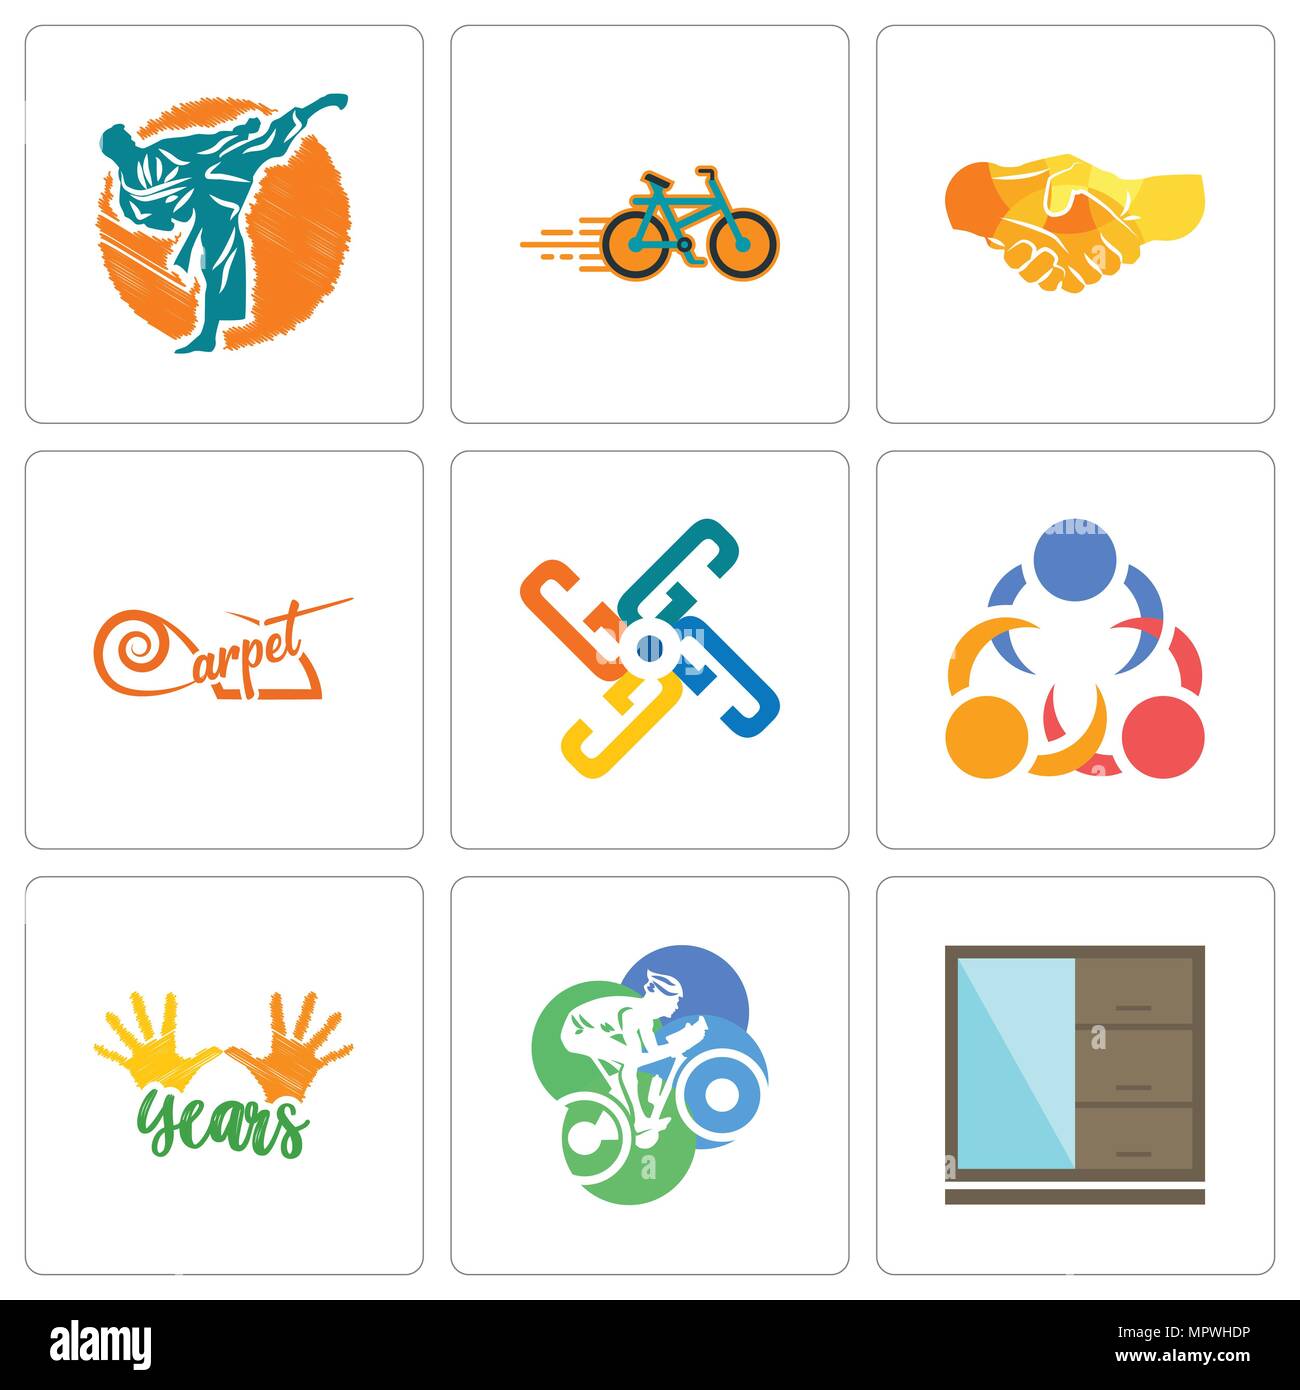 Set Of 9 simple editable icons such as wardrobe, cyclist, 10 years, 3 people, generic, carpet, hand shake, bike shop, martial arts, can be used for mo Stock Vector